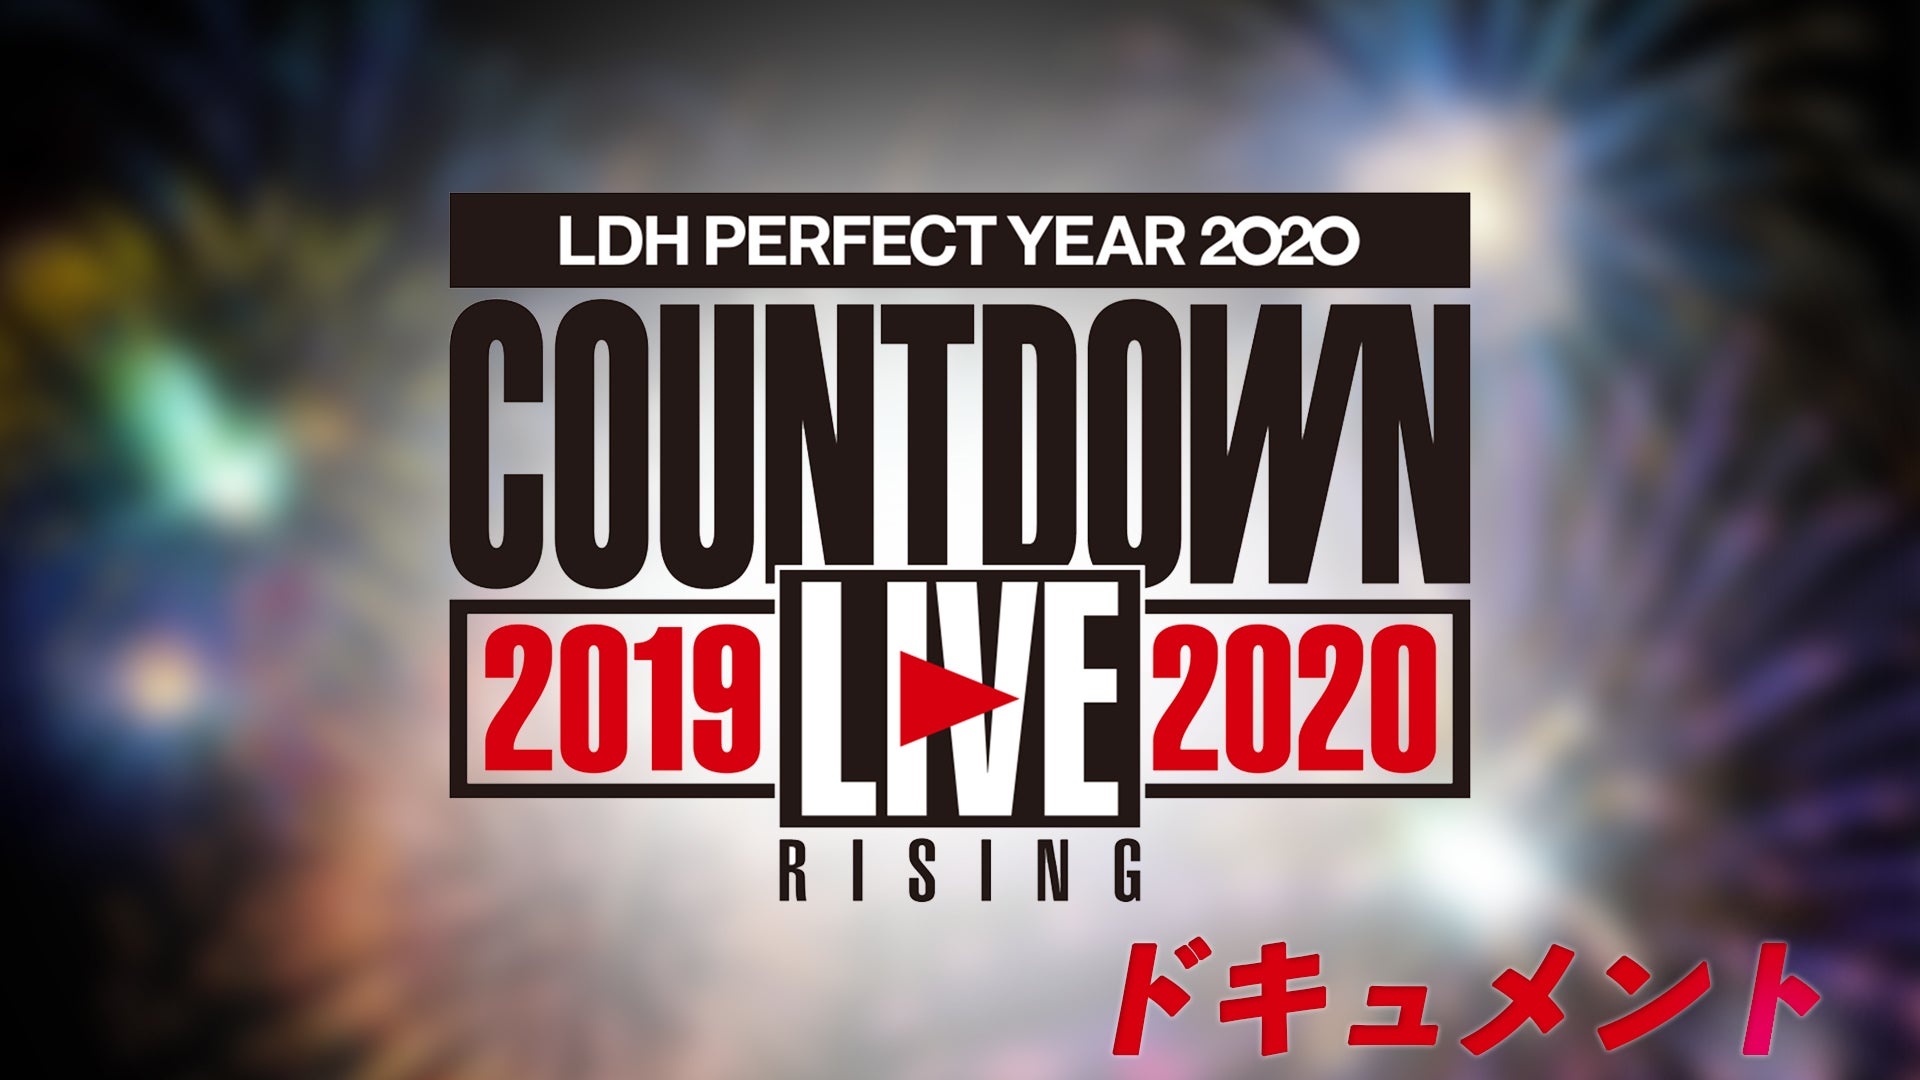 LDH PERFECT YEAR 2020 COUNTDOWN LIVE